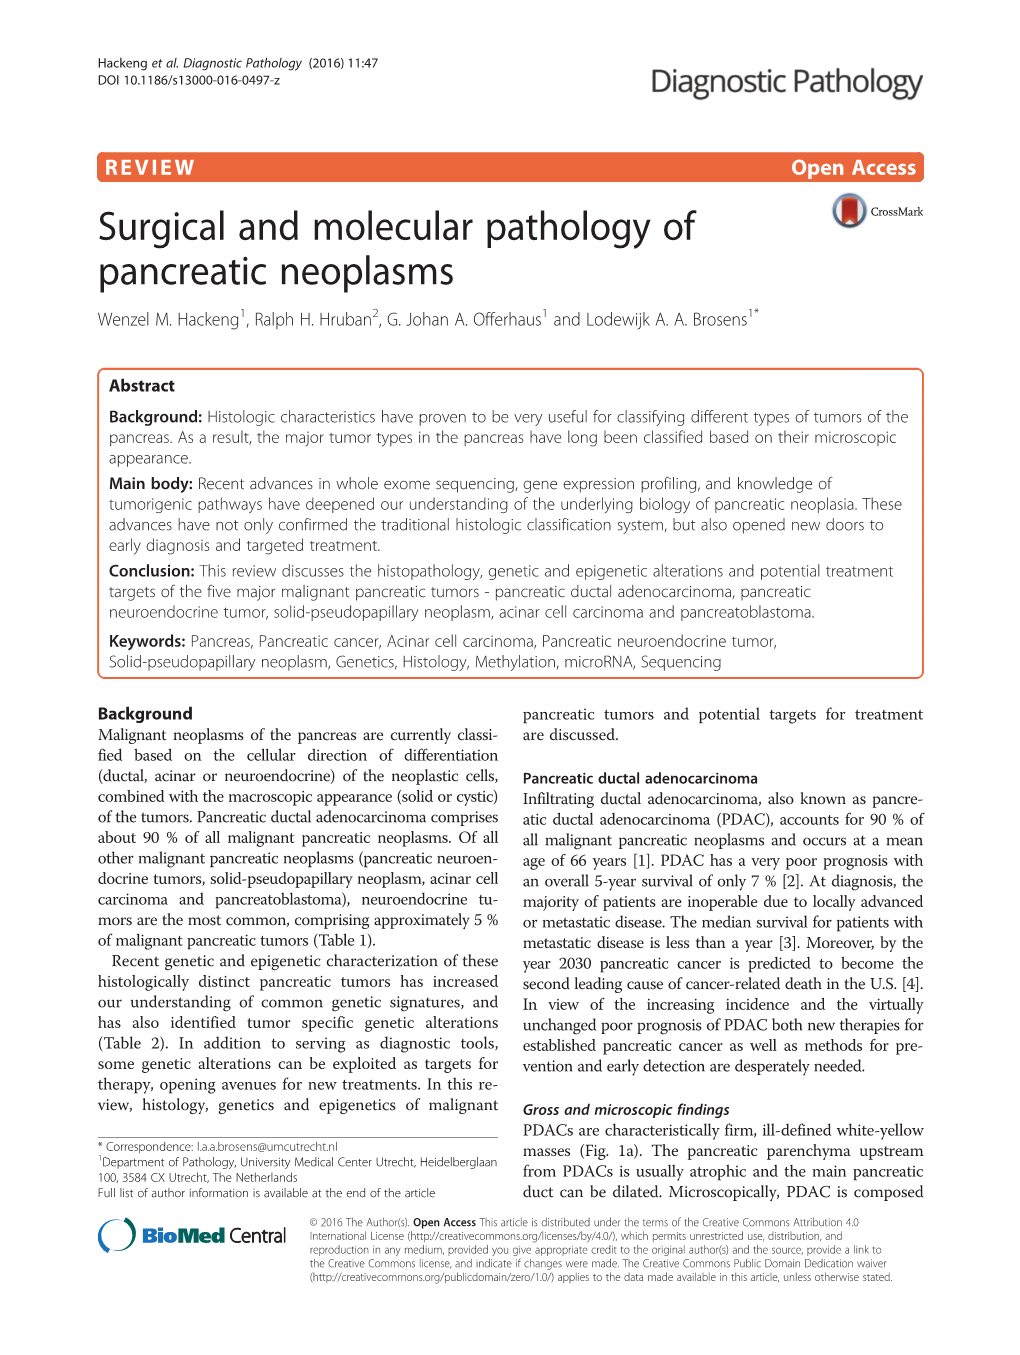 Surgical and Molecular Pathology of Pancreatic Neoplasms Wenzel M